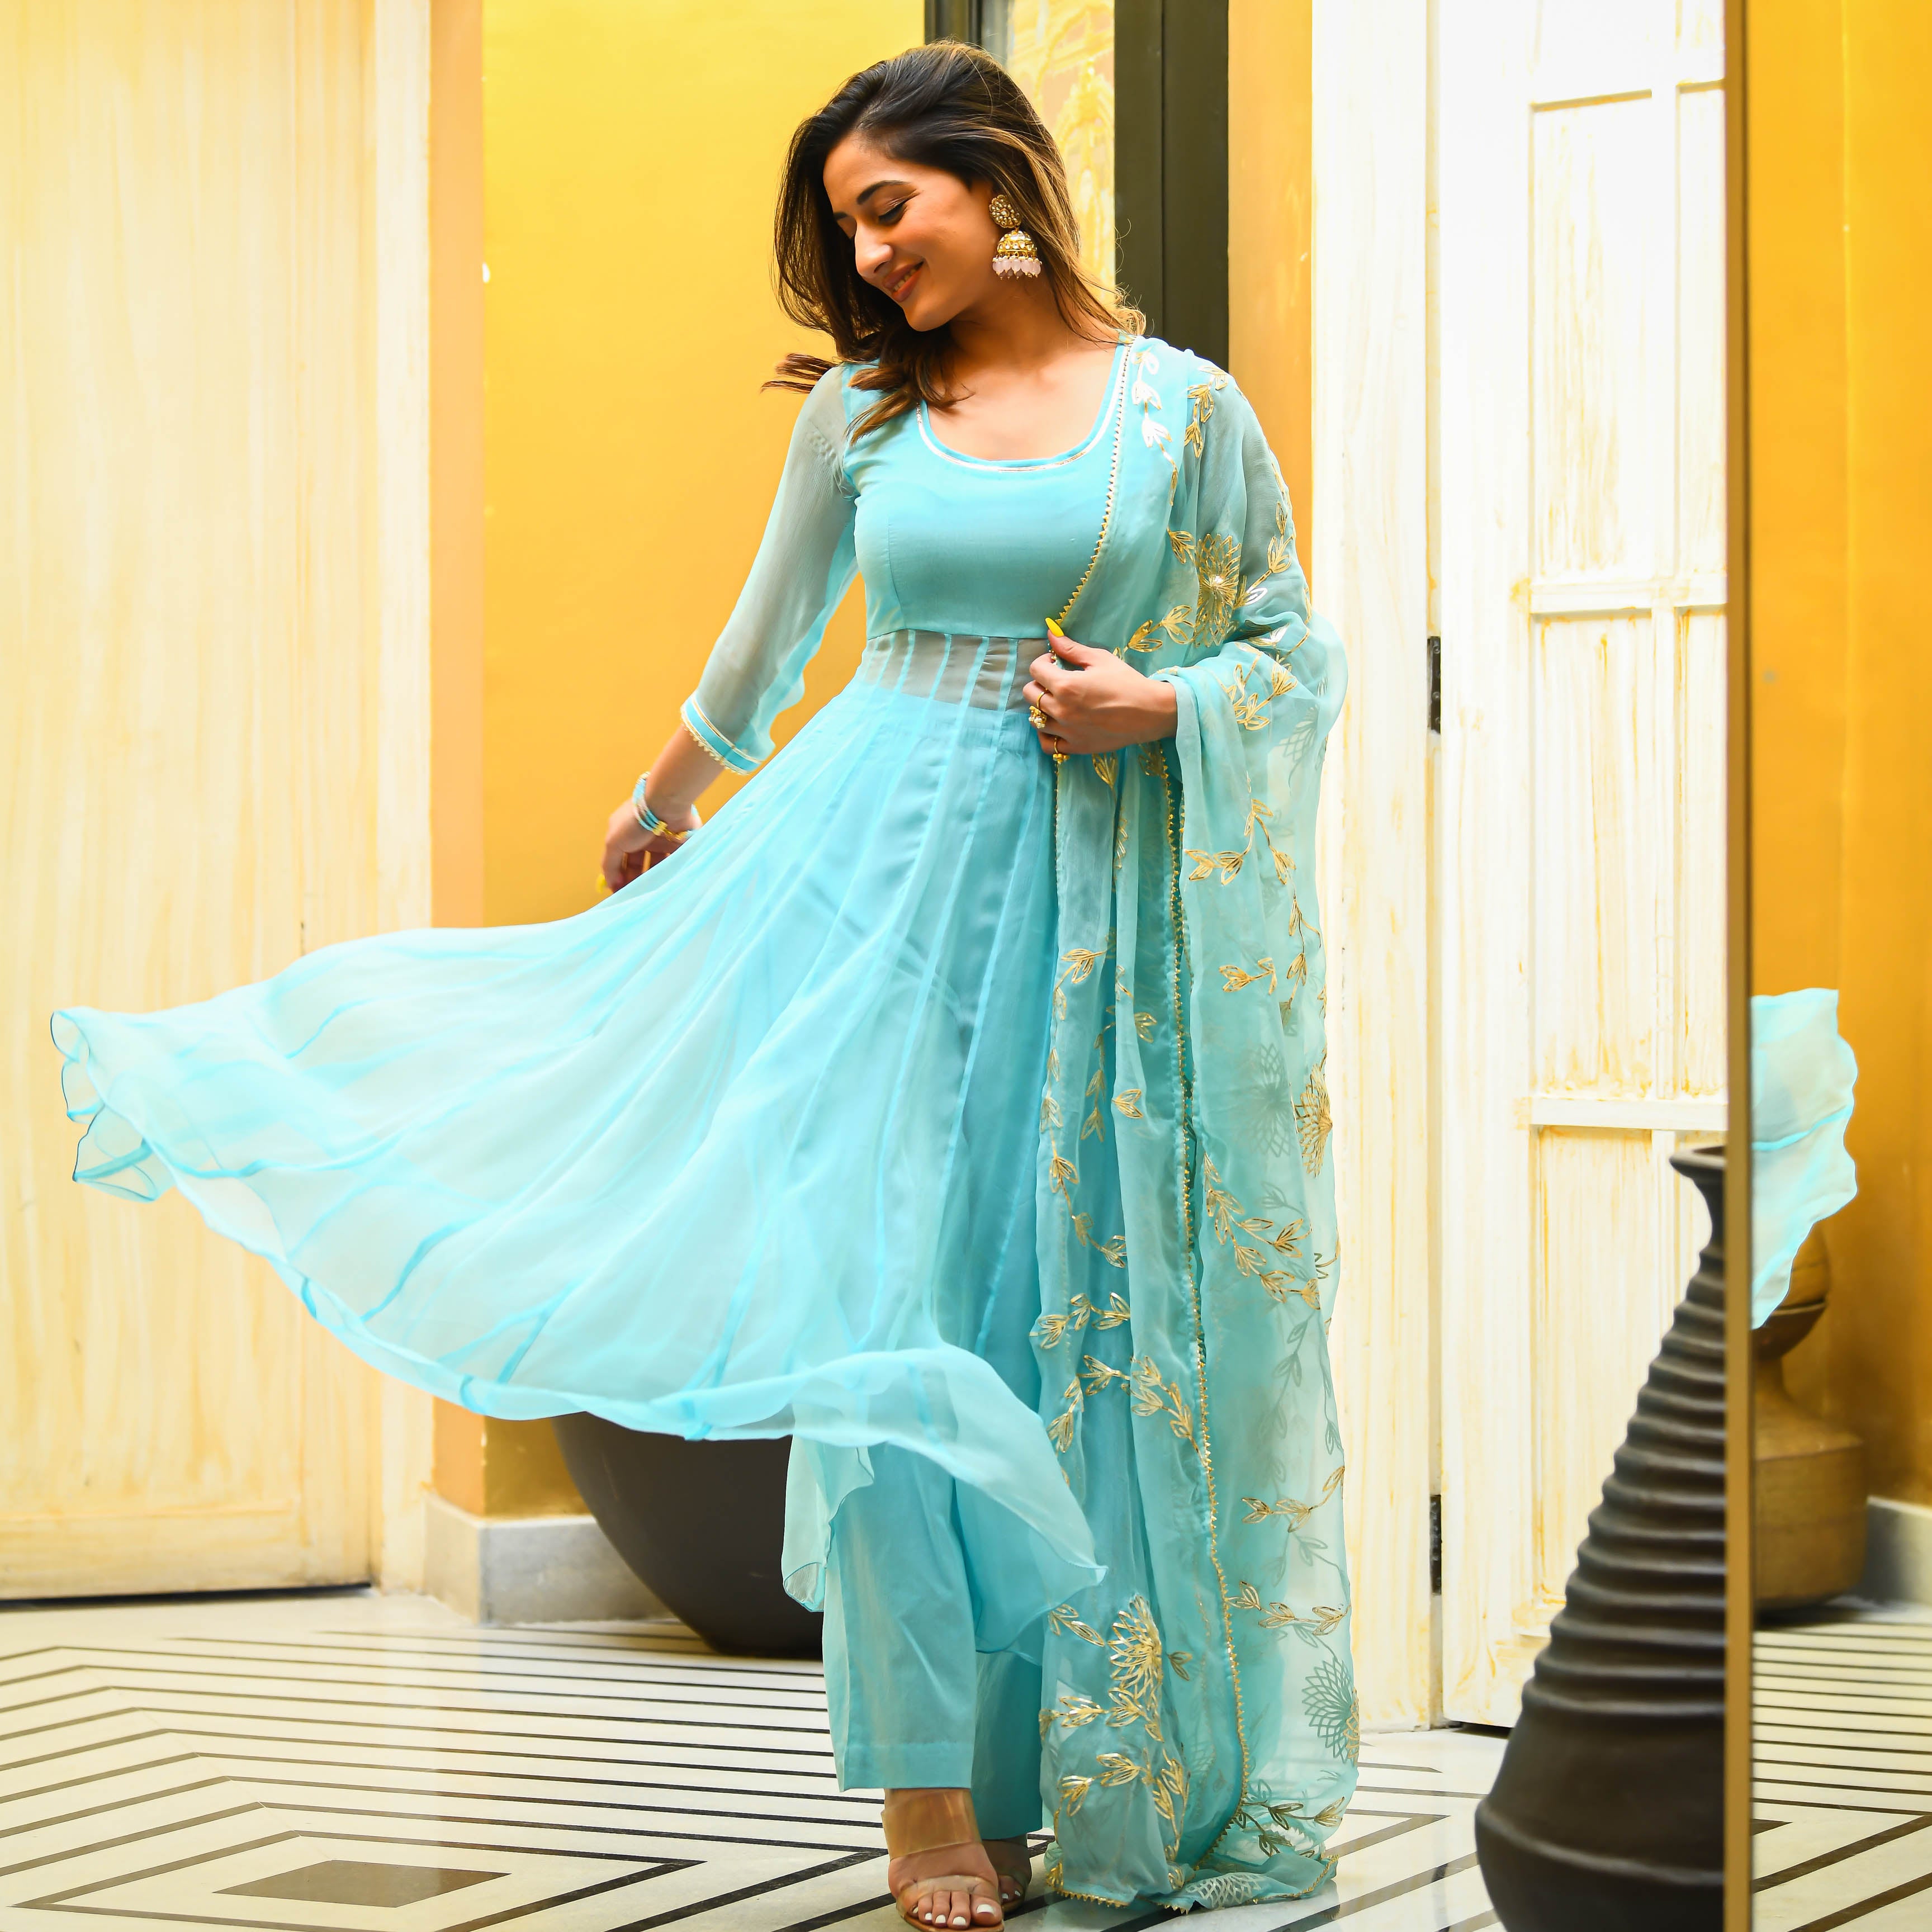 Women's Sky Blue Colour Semi-Stitched Suit Sets - Dwija Fashion in 2023 |  Suits for women, Pink fashion, Women